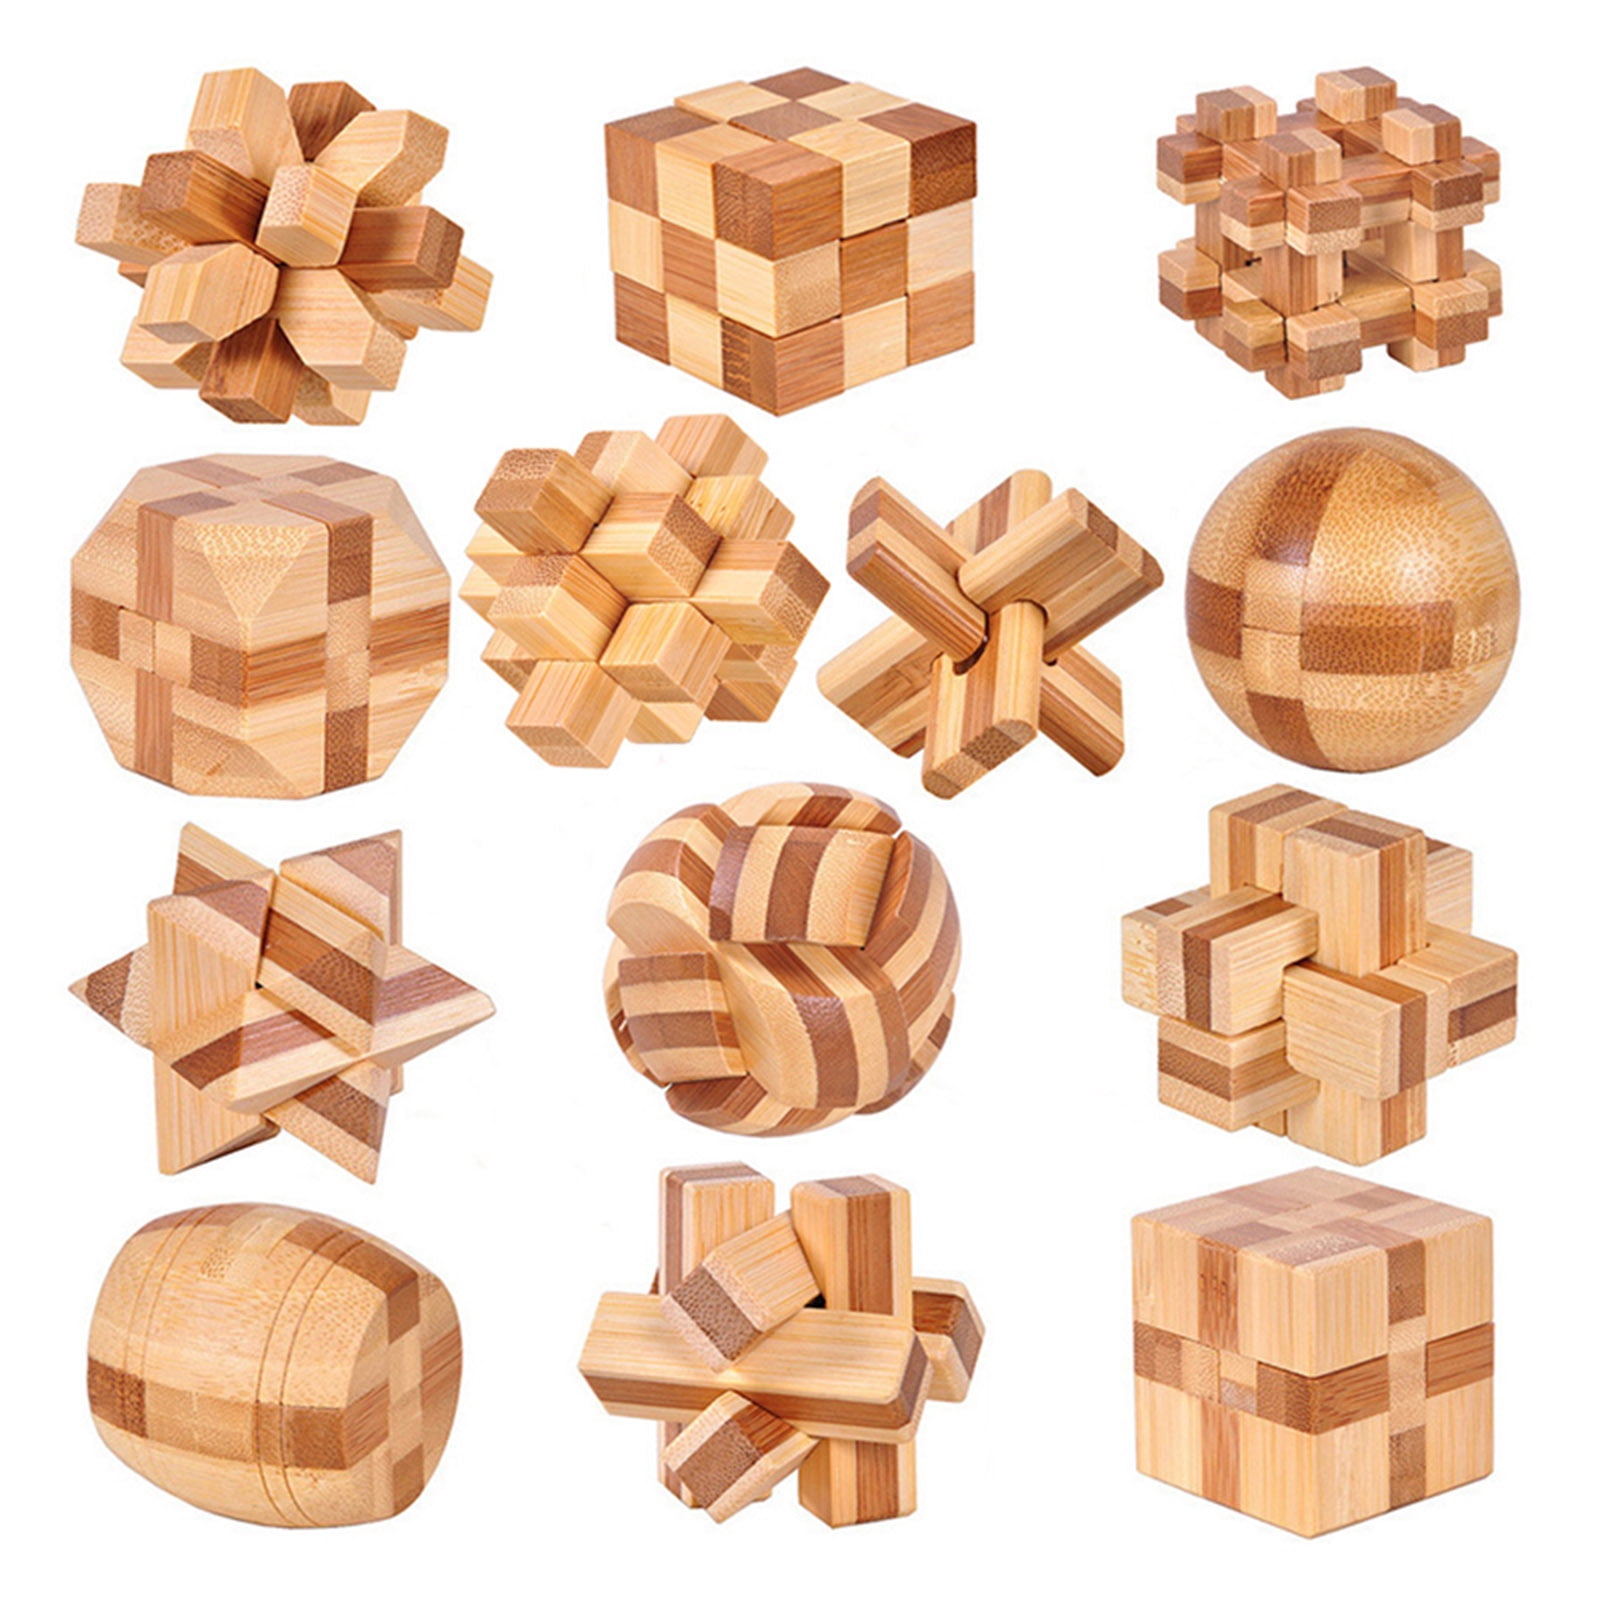 Kong Ming Luban Lock Kids Adult Wooden Intellectual Puzzle Brain Tease Toys Gift 